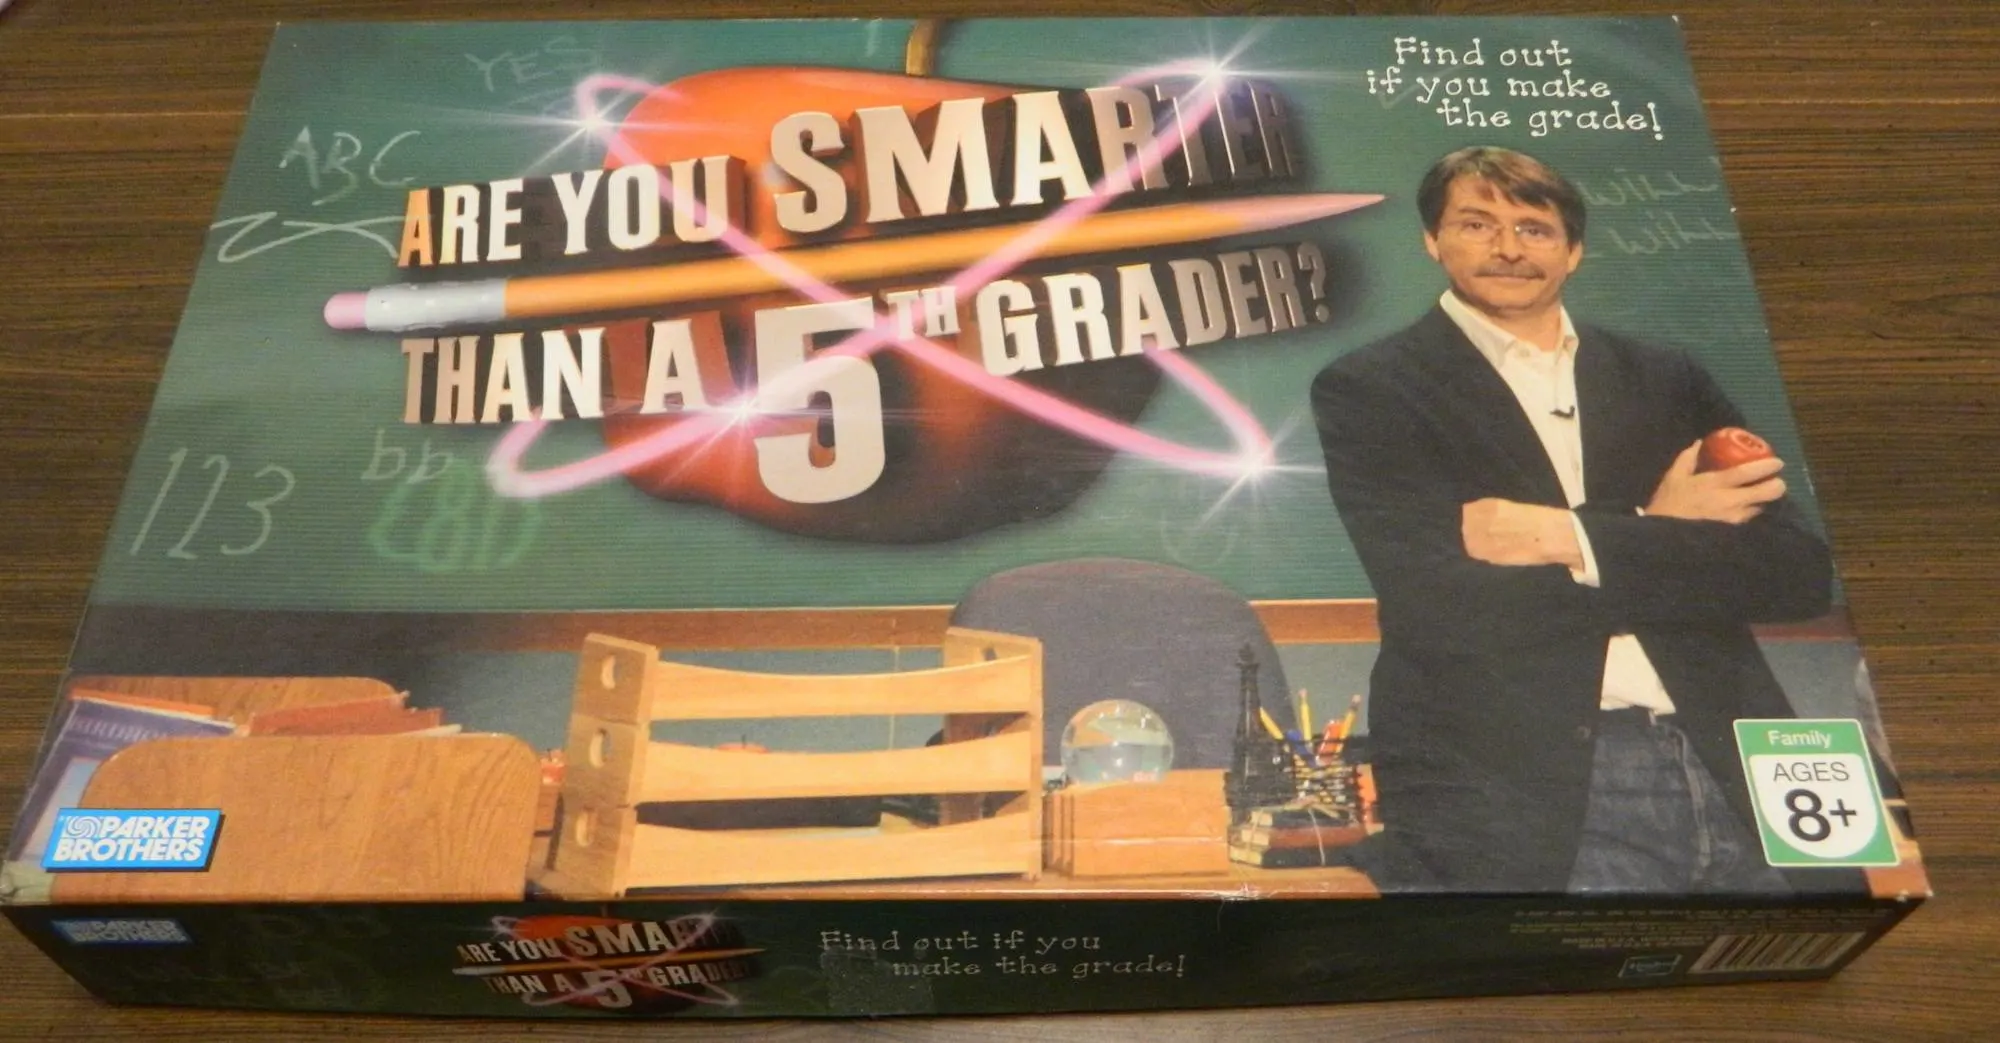 Box for Are You Smarter Than A 5th Grader